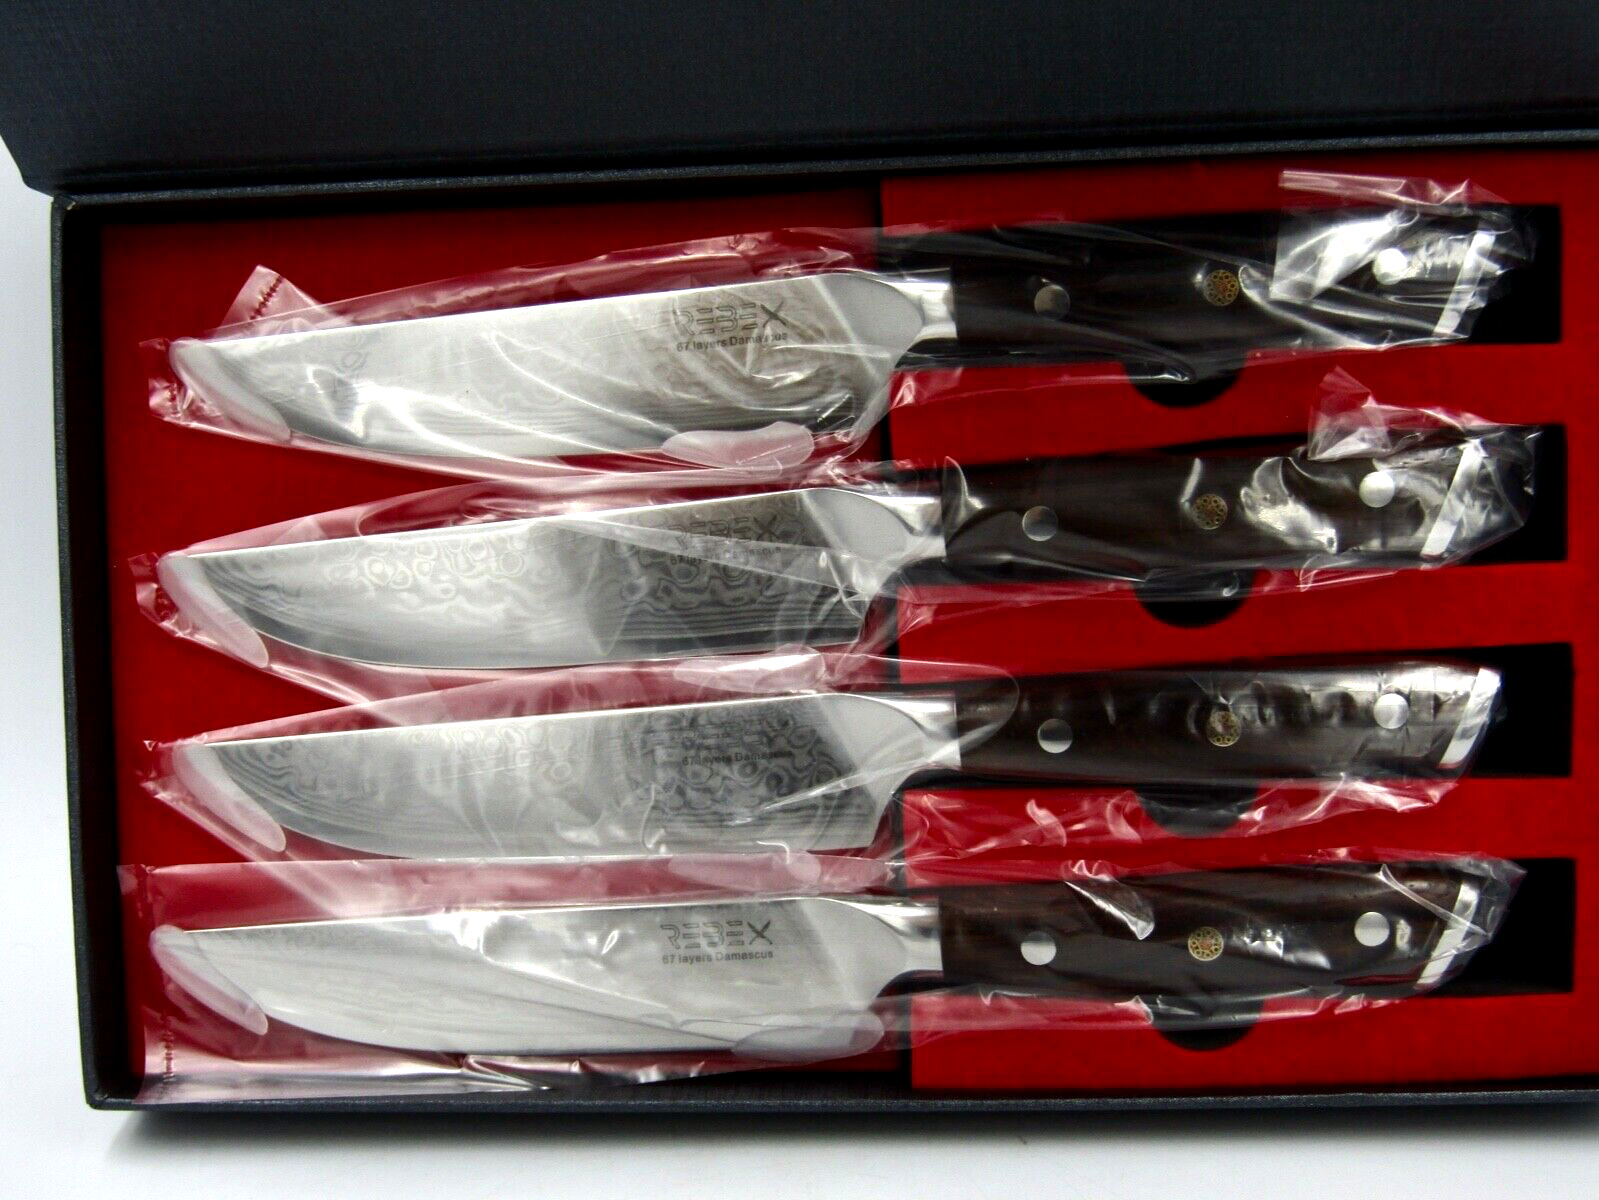 4 Pc - 67 Layers Damascus steak knife set by REBEX with Rosewood Handle ($300)